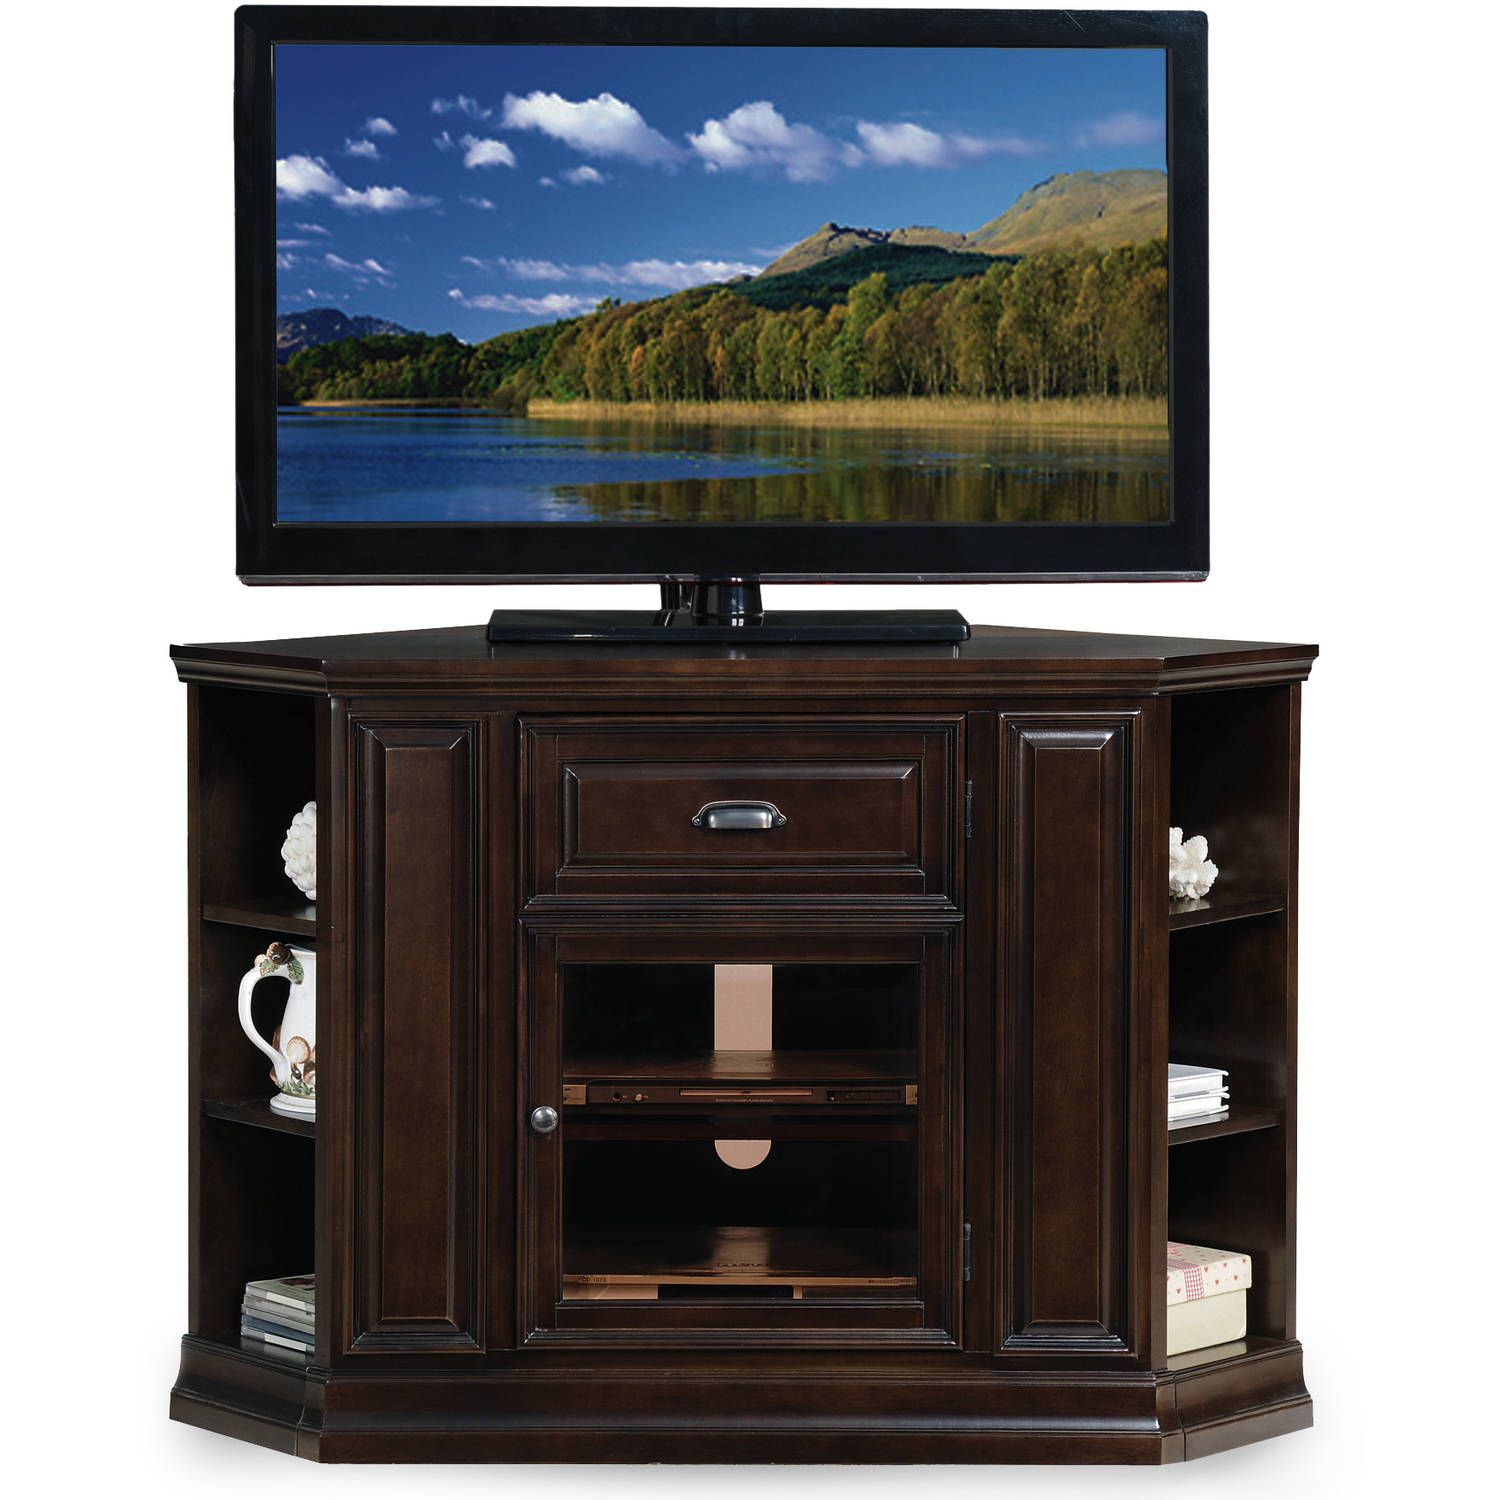 Leick Home 32" High Corner Tv Stand W/bookcase For Tv's Up With 32 Inch Corner Tv Stands (View 3 of 15)